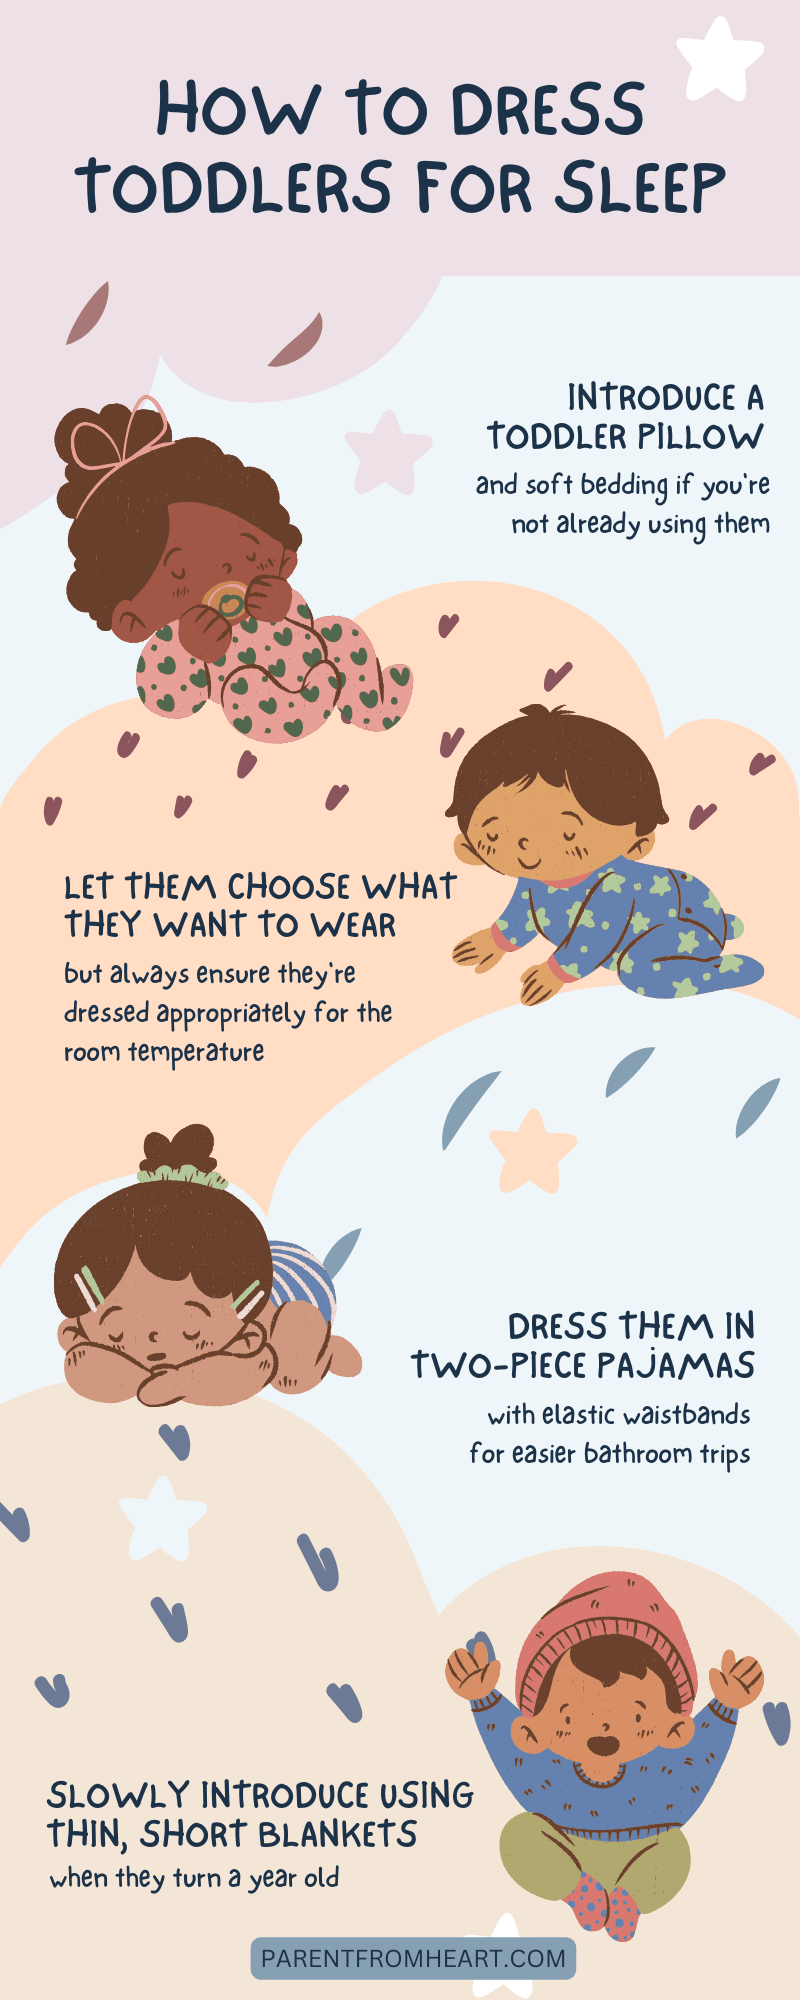 Infographics on how to dress toddlers for sleep.